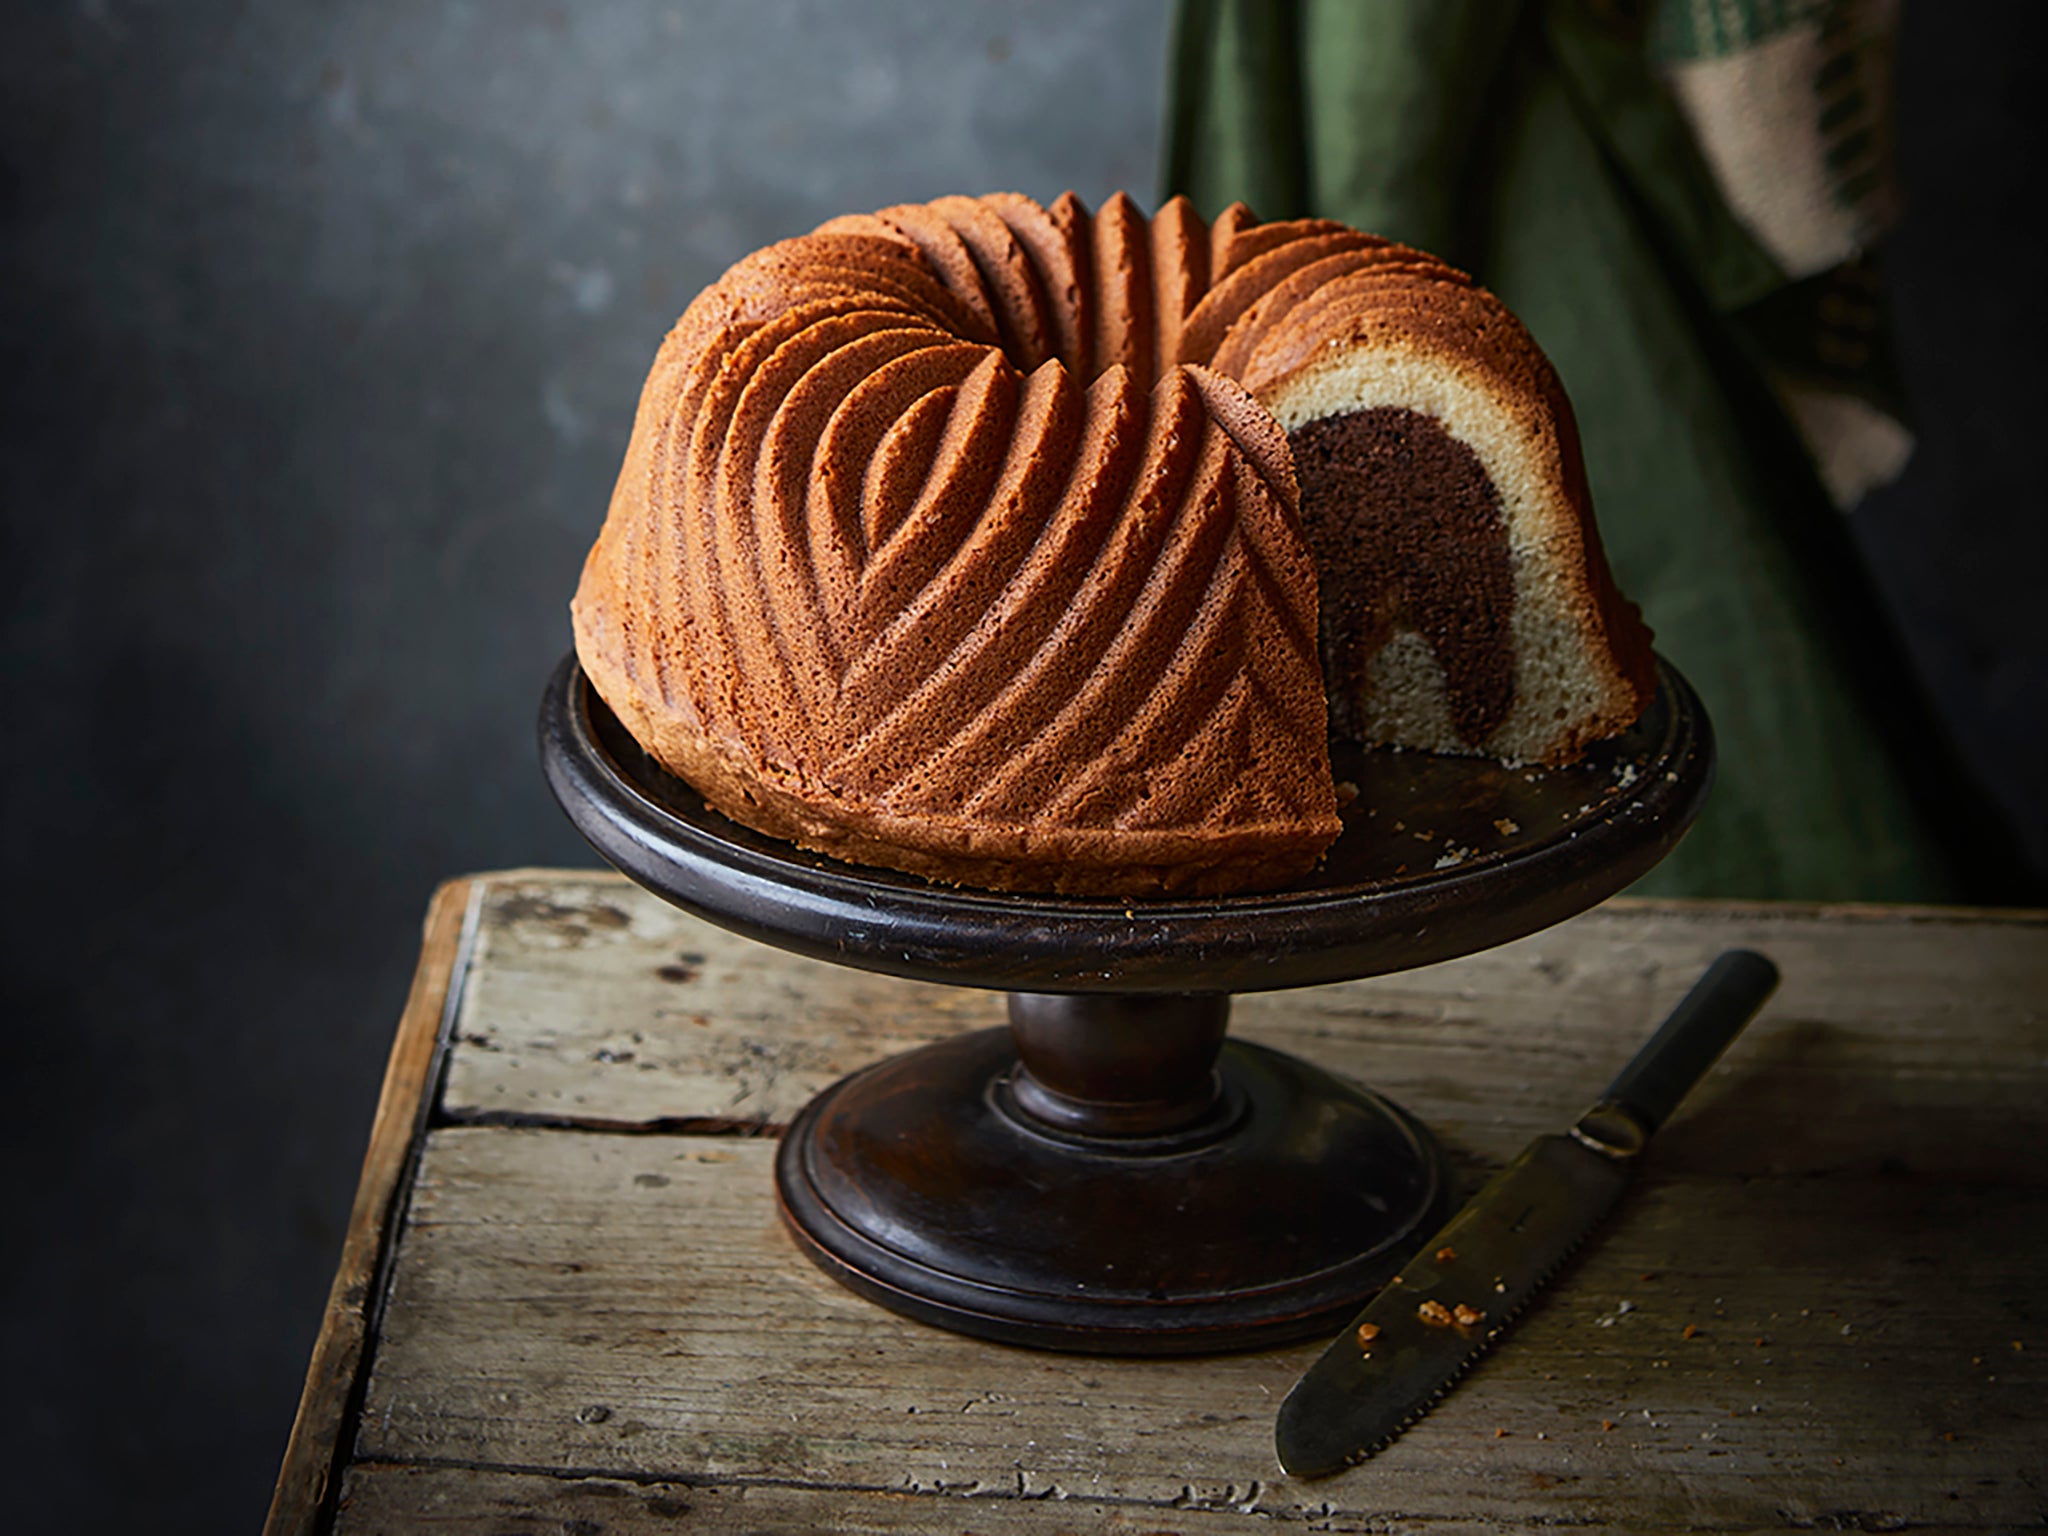 Homemade Marble Cake (+ Chocolate Frosting) - Live Well Bake Often